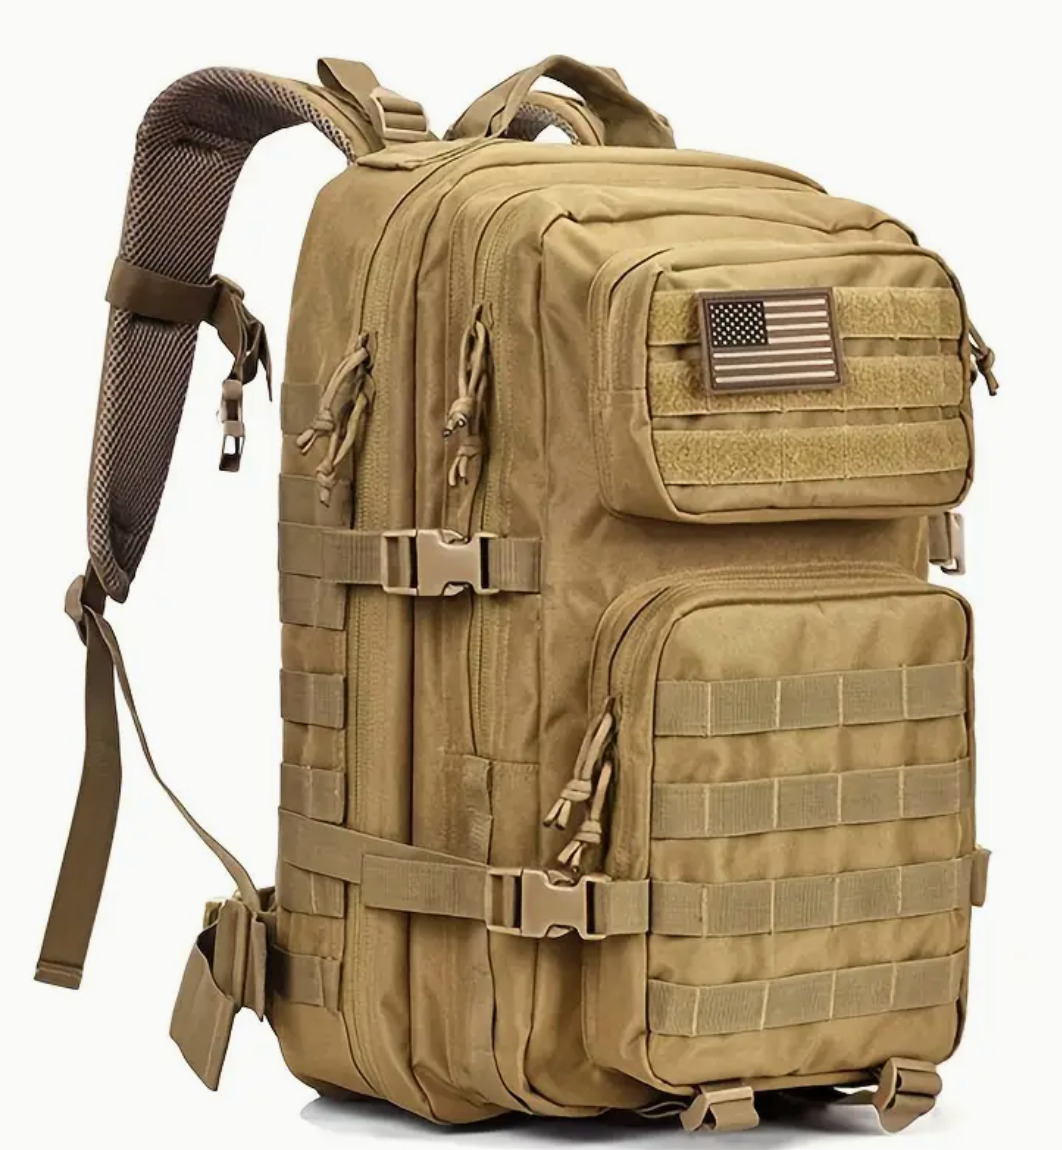 45L Large Military Tactical Backpack Army Molle Bag Rucksack 3 Day Assault Pack